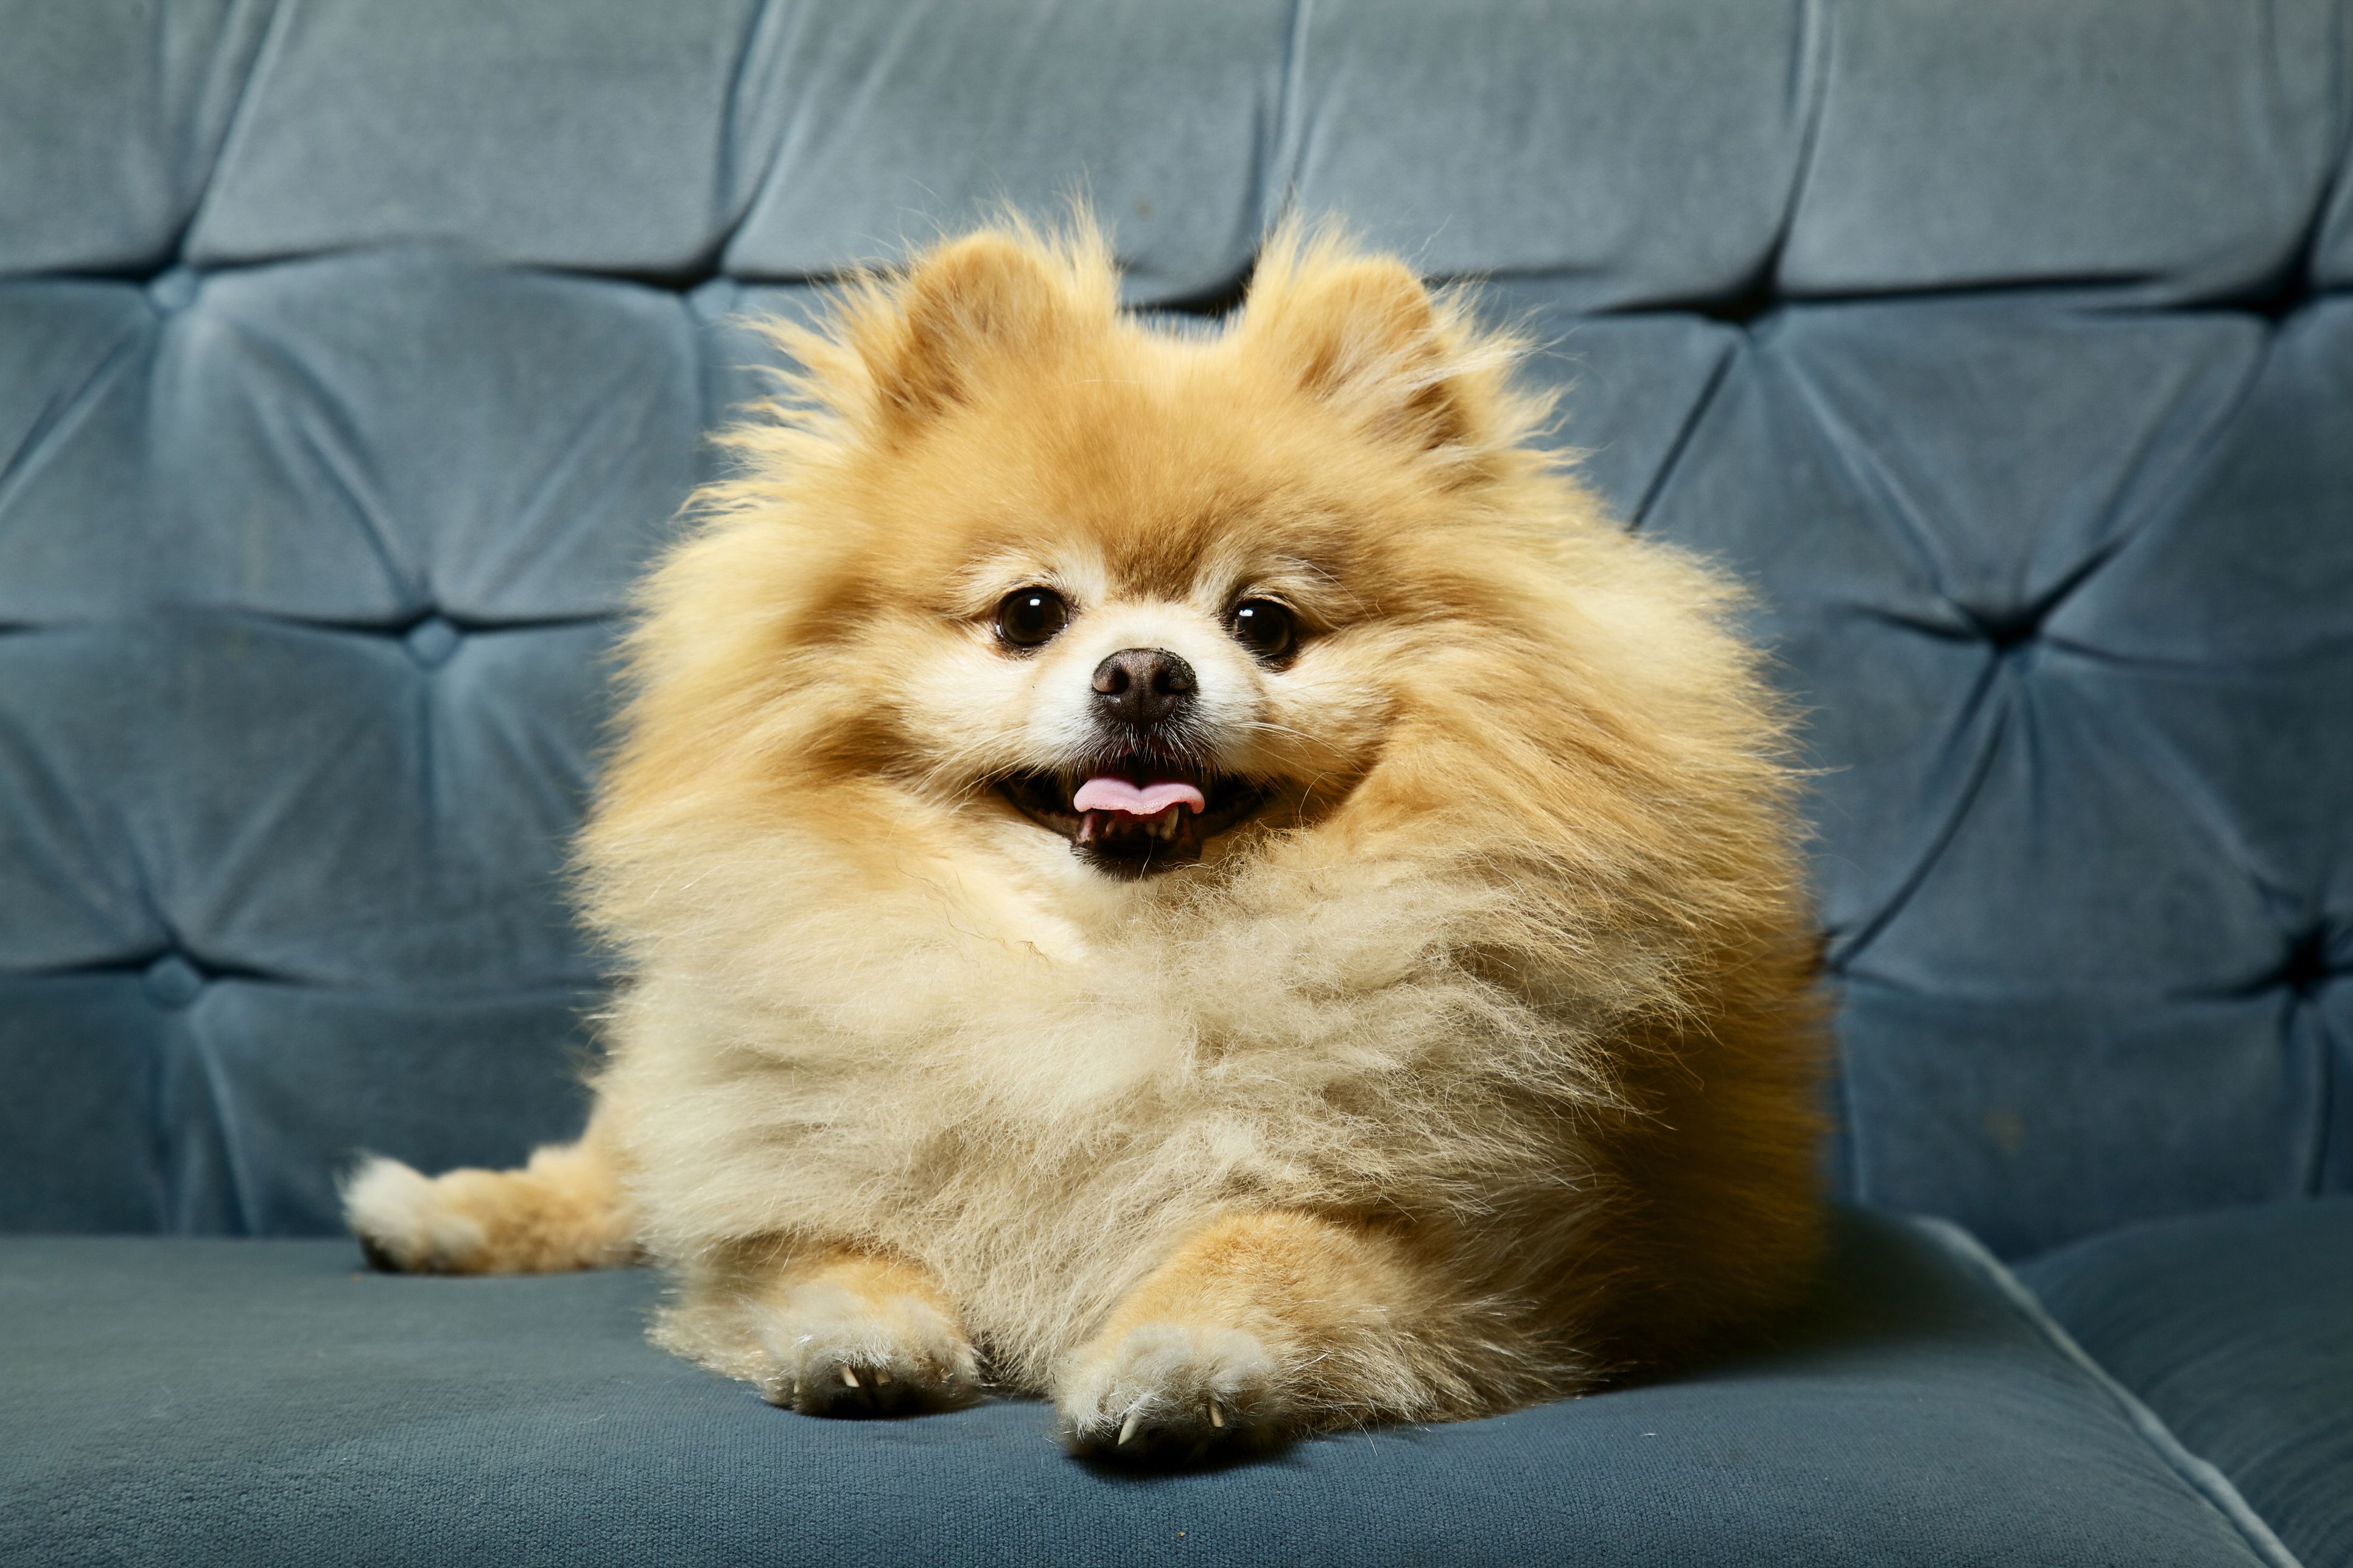 Pomeranian sitting on a couch smiling